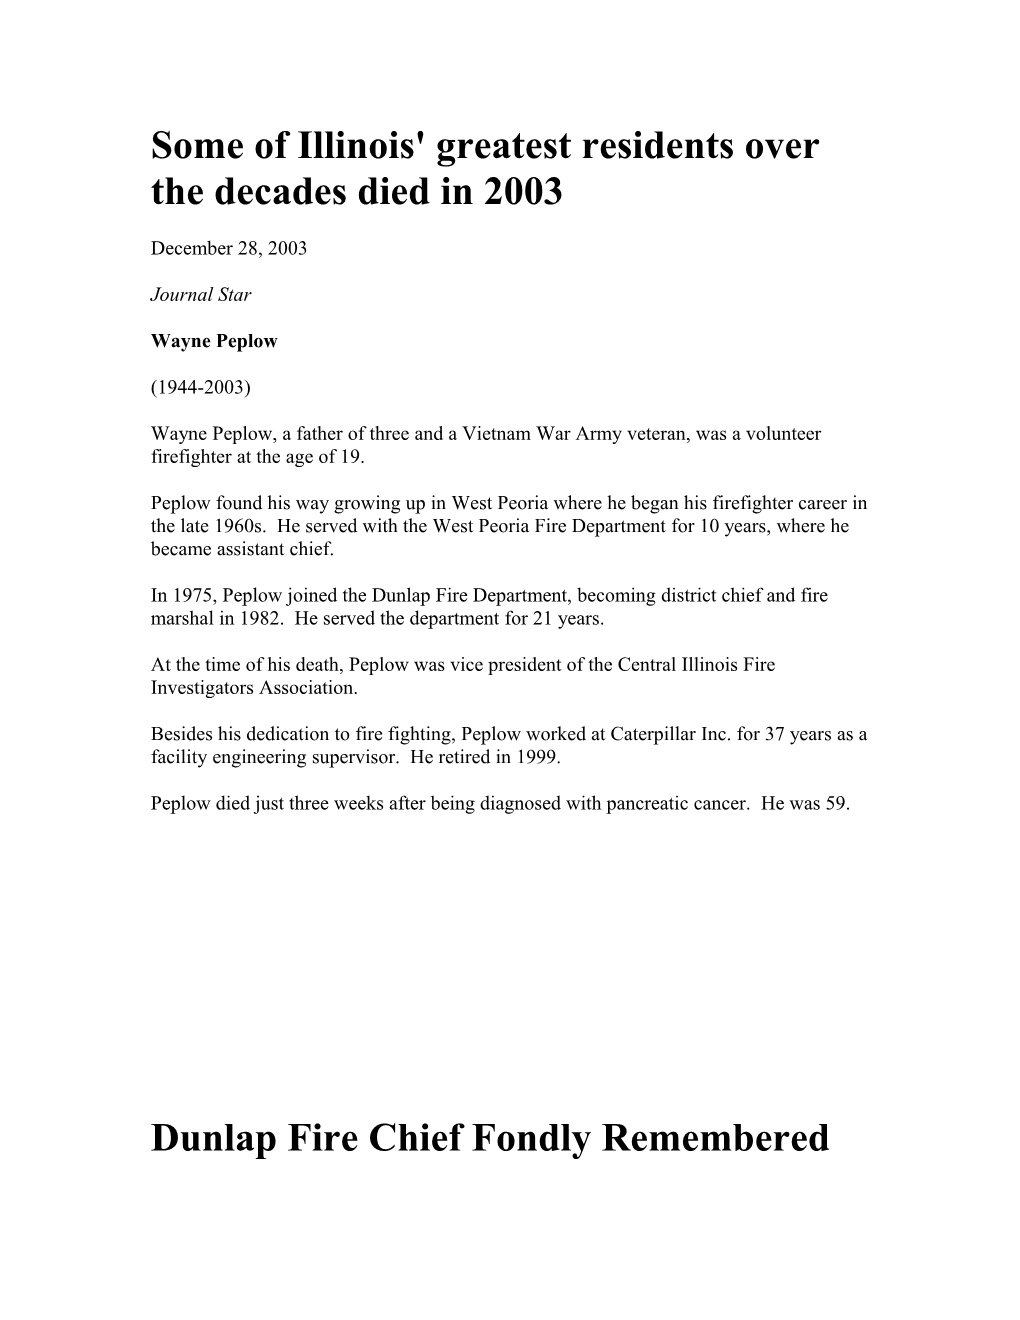 Dunlap Fire Chief Fondly Remembered